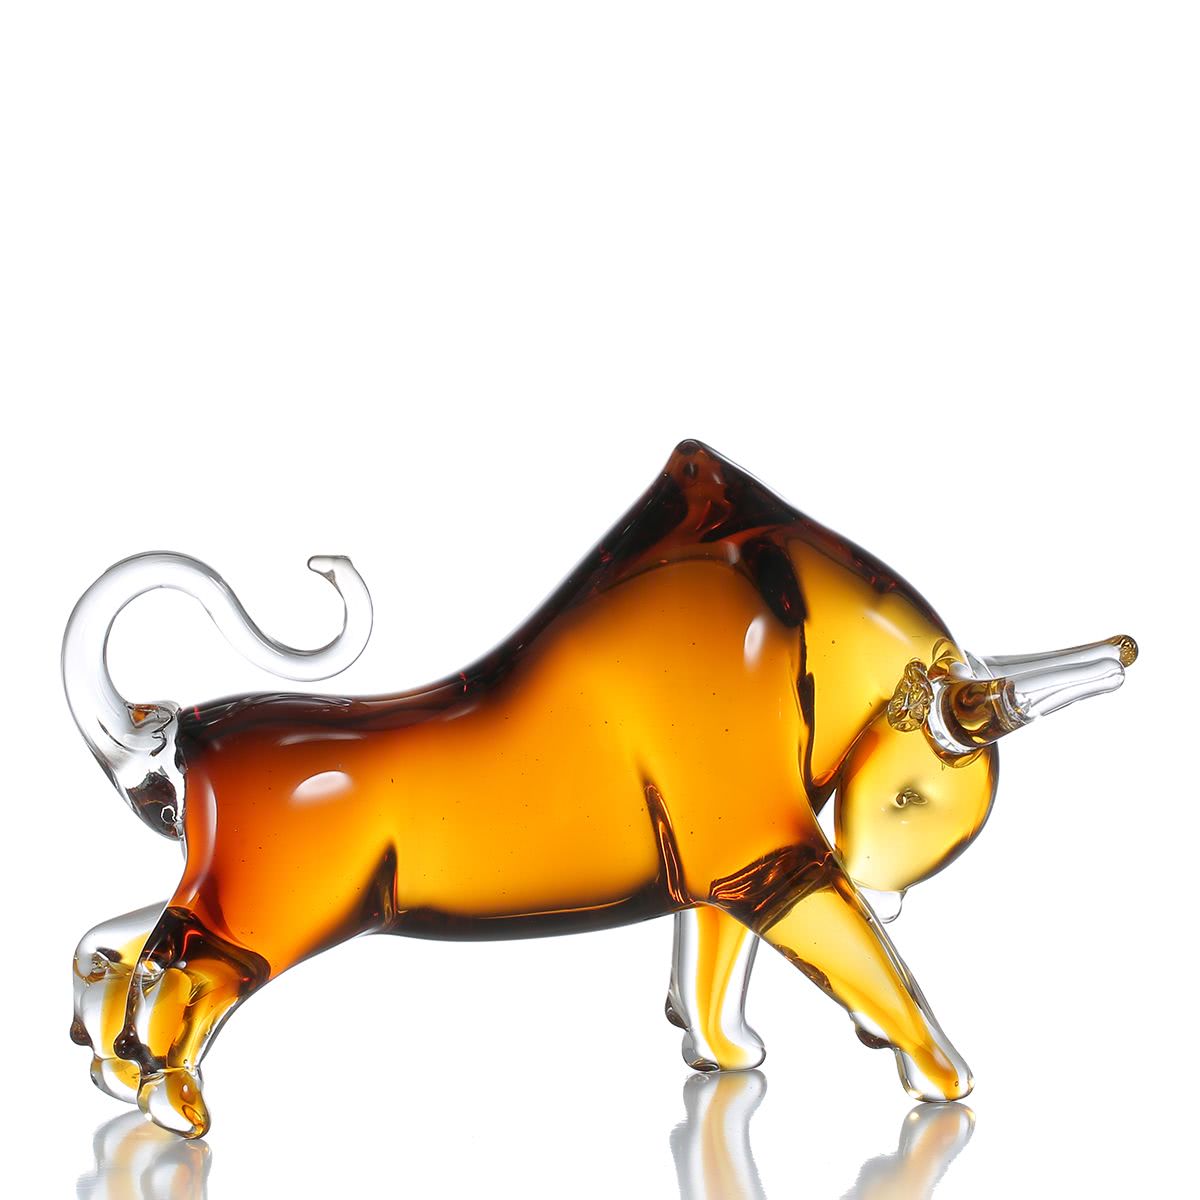 Glass Animal Ornaments and Art Glass Sculpture with Hand Blown for Christmas Gifts and Christmas Decorations